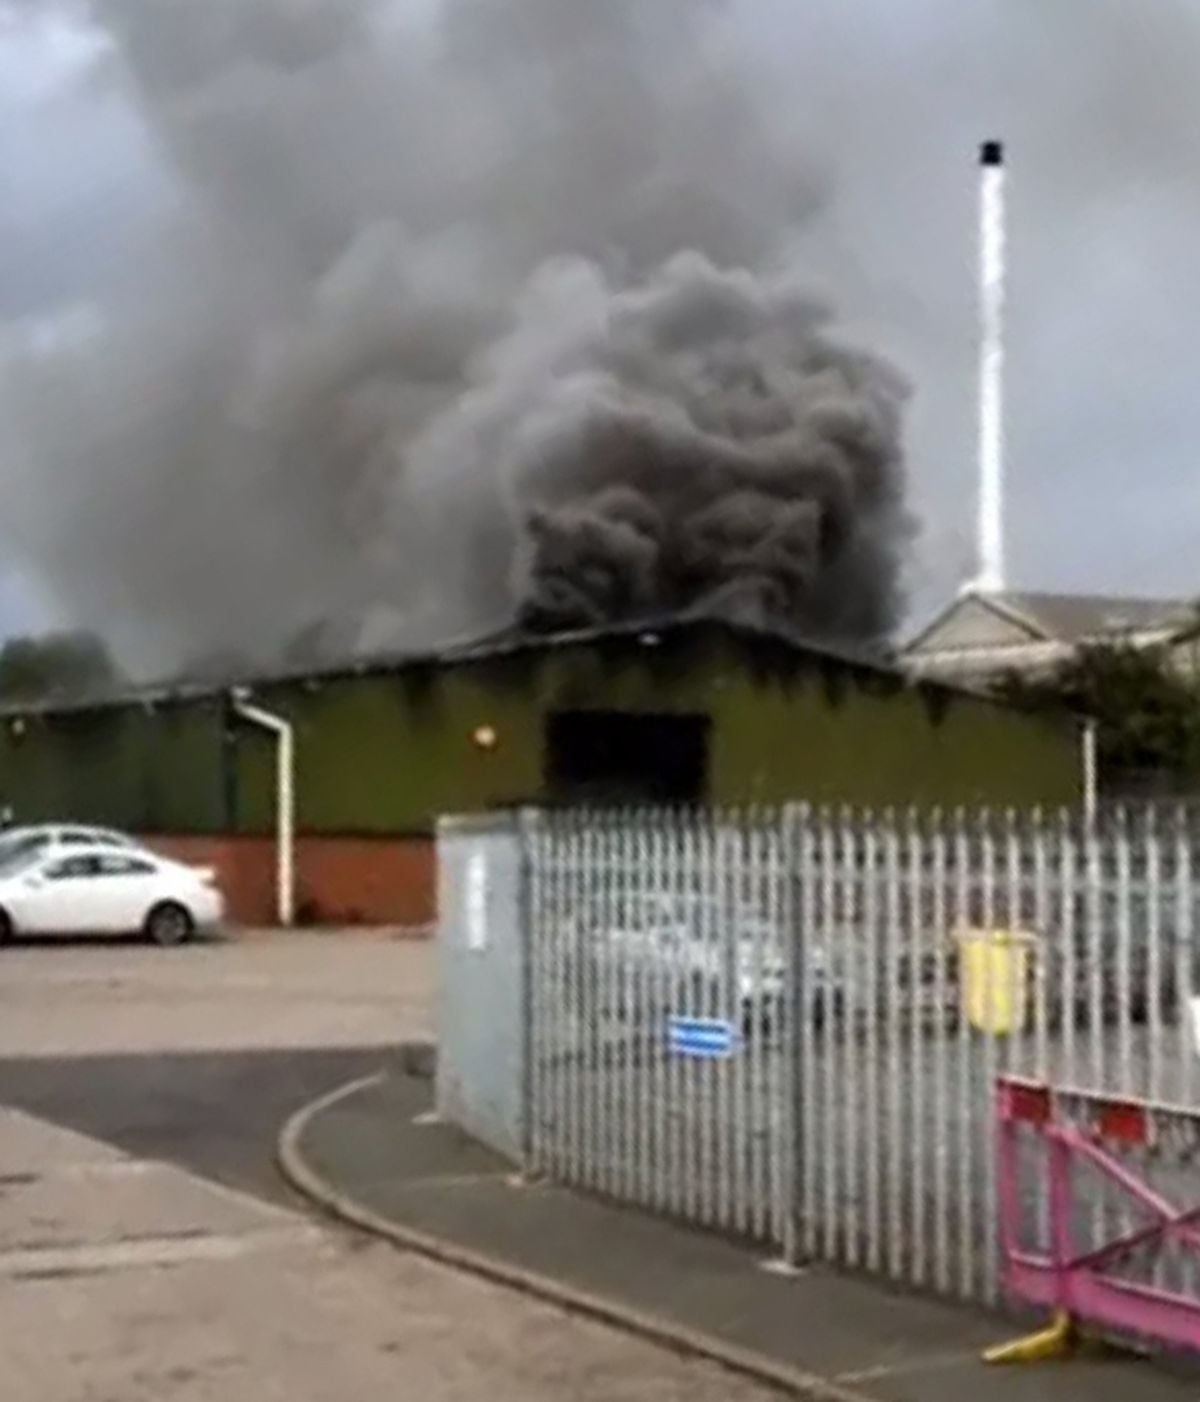 The fire in Brierley Hill. Photo: West Midlands Fire Service